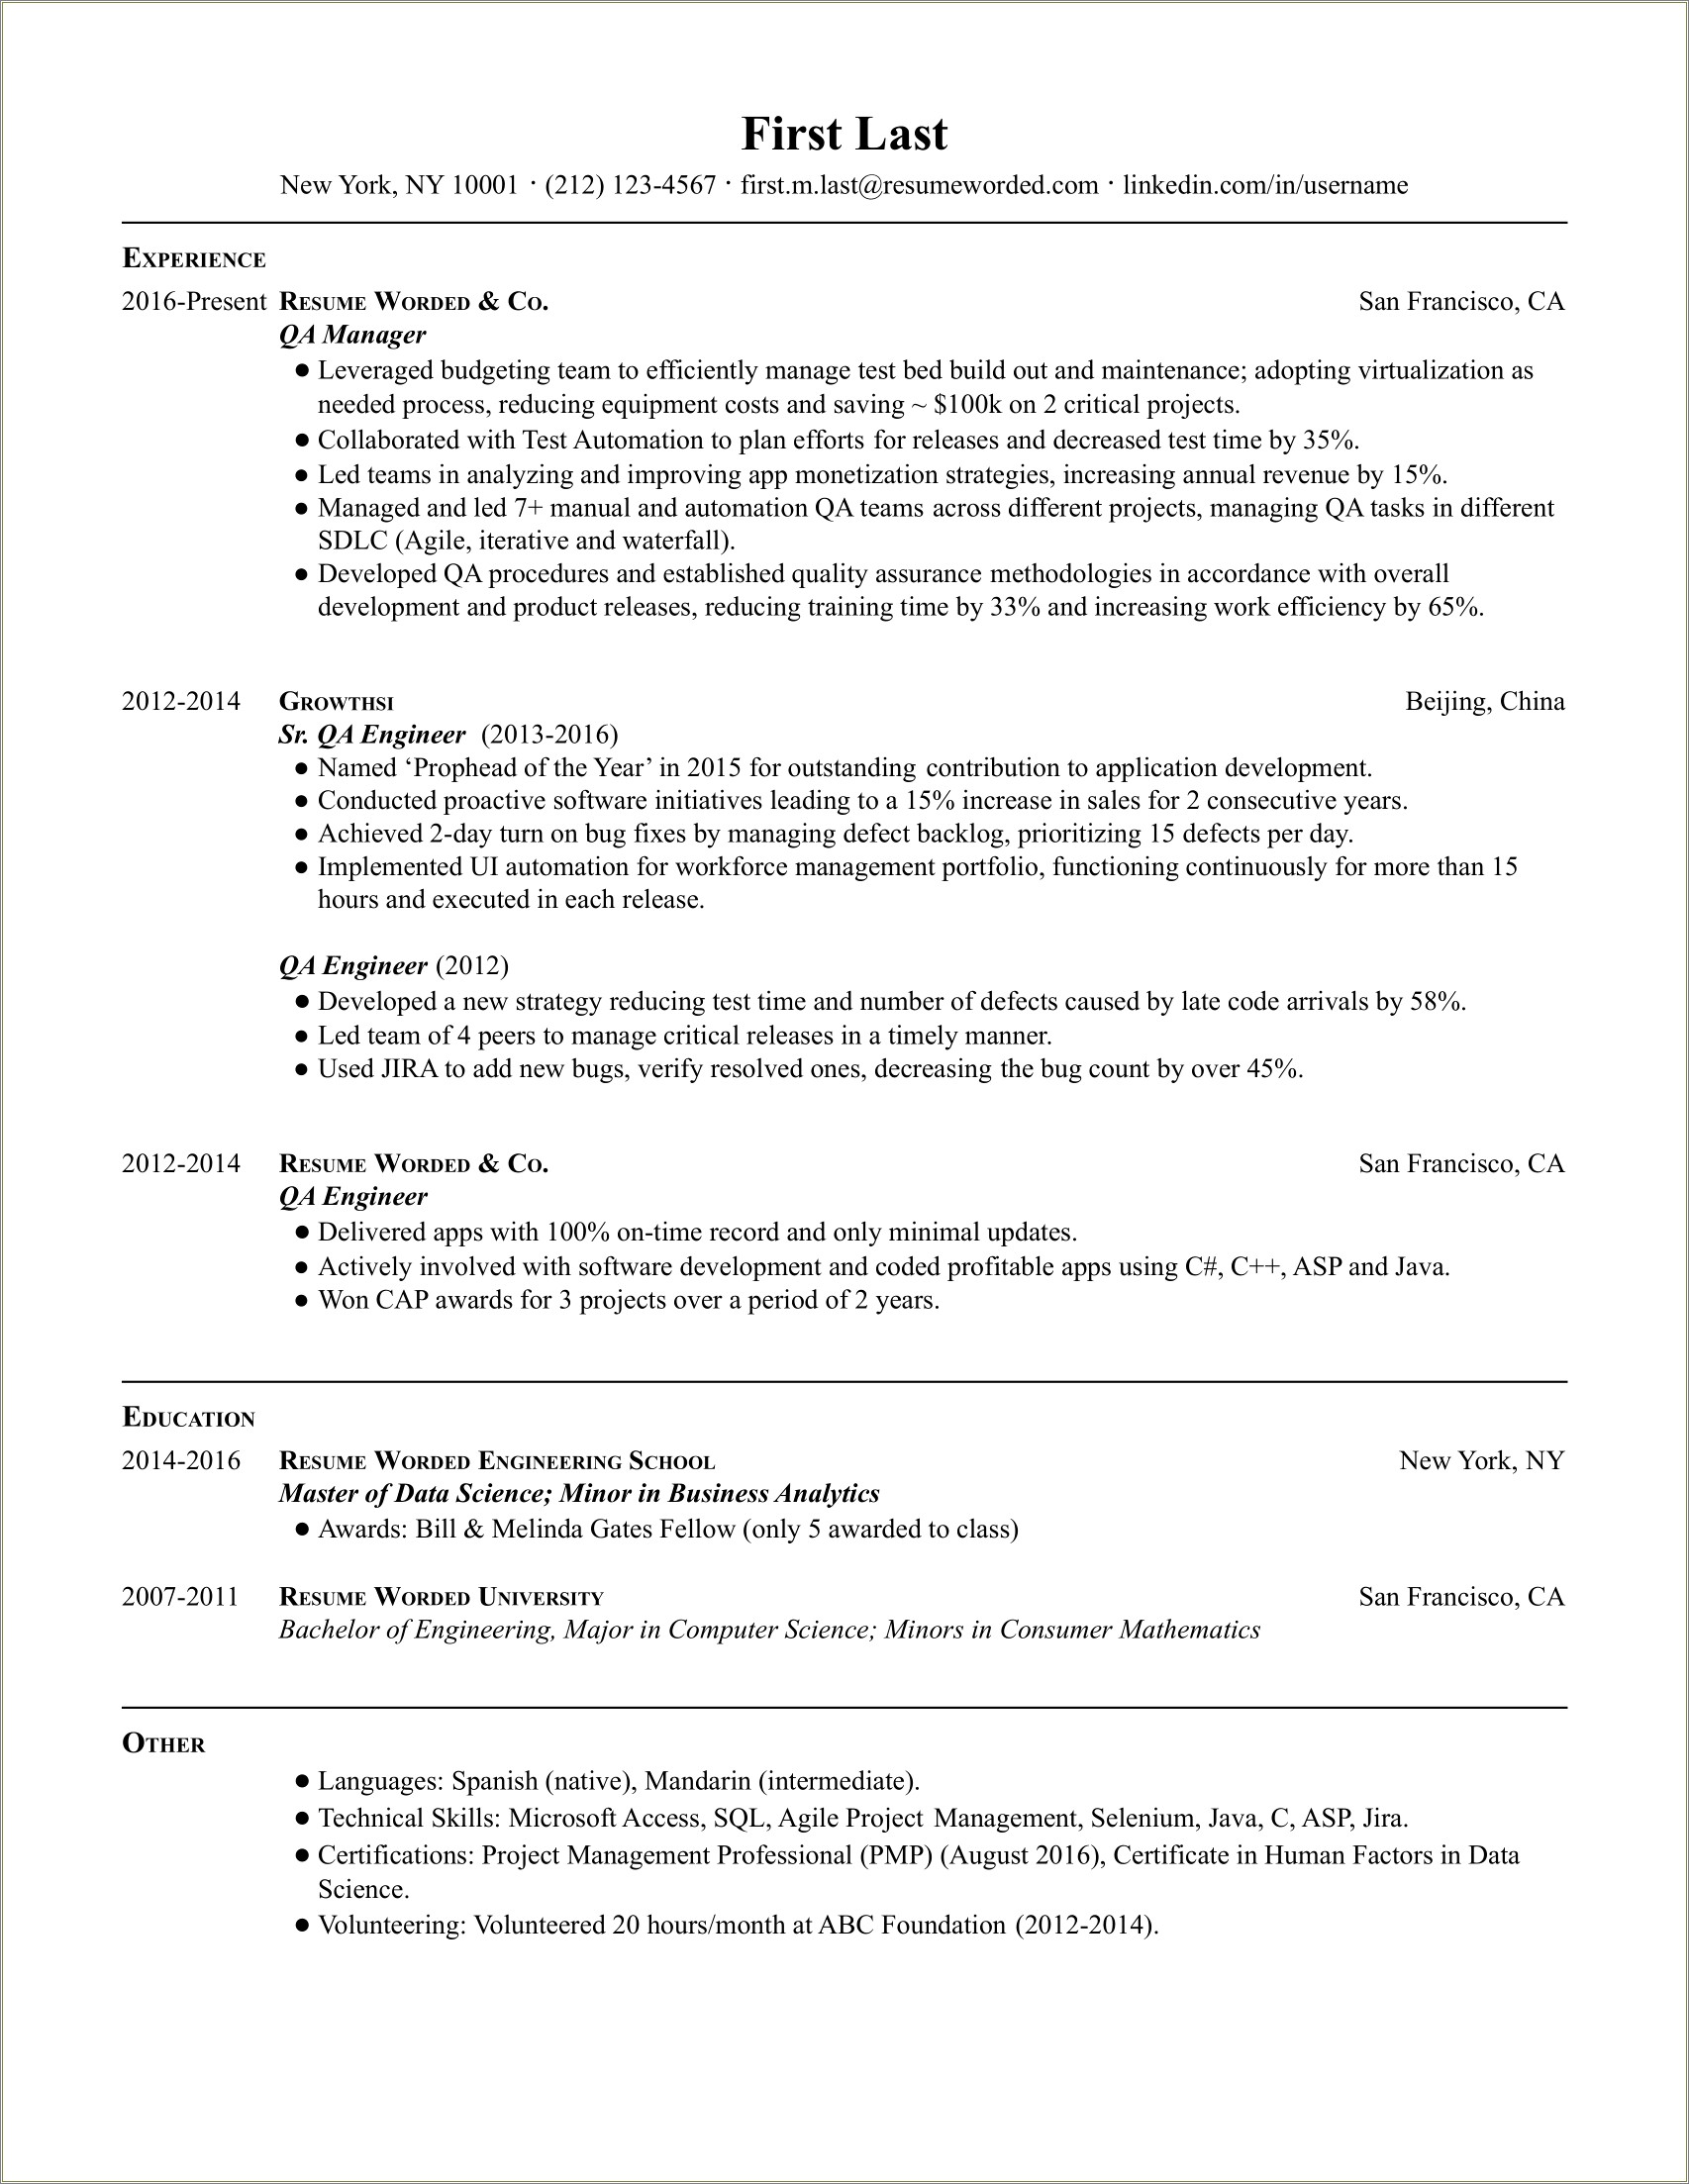 Manual Testing Resume For 4 Years Experience